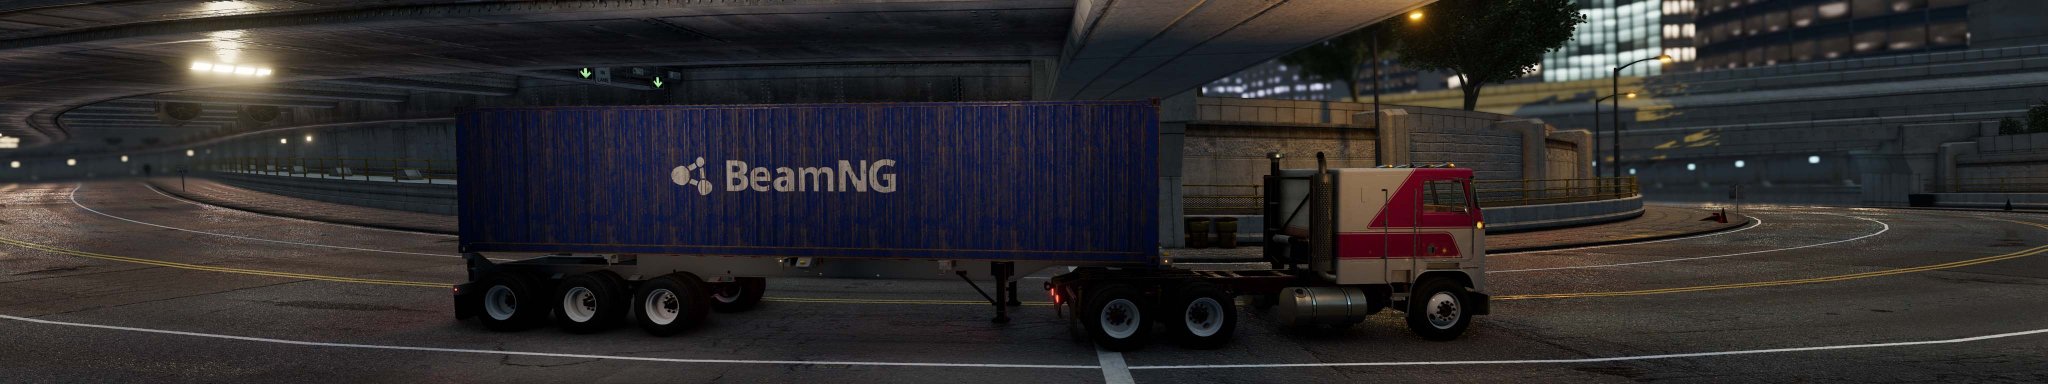 2 BeamNG FAIRHAVEN Gavril T SERIES delivery to PLAZA HOTEL copy.jpg